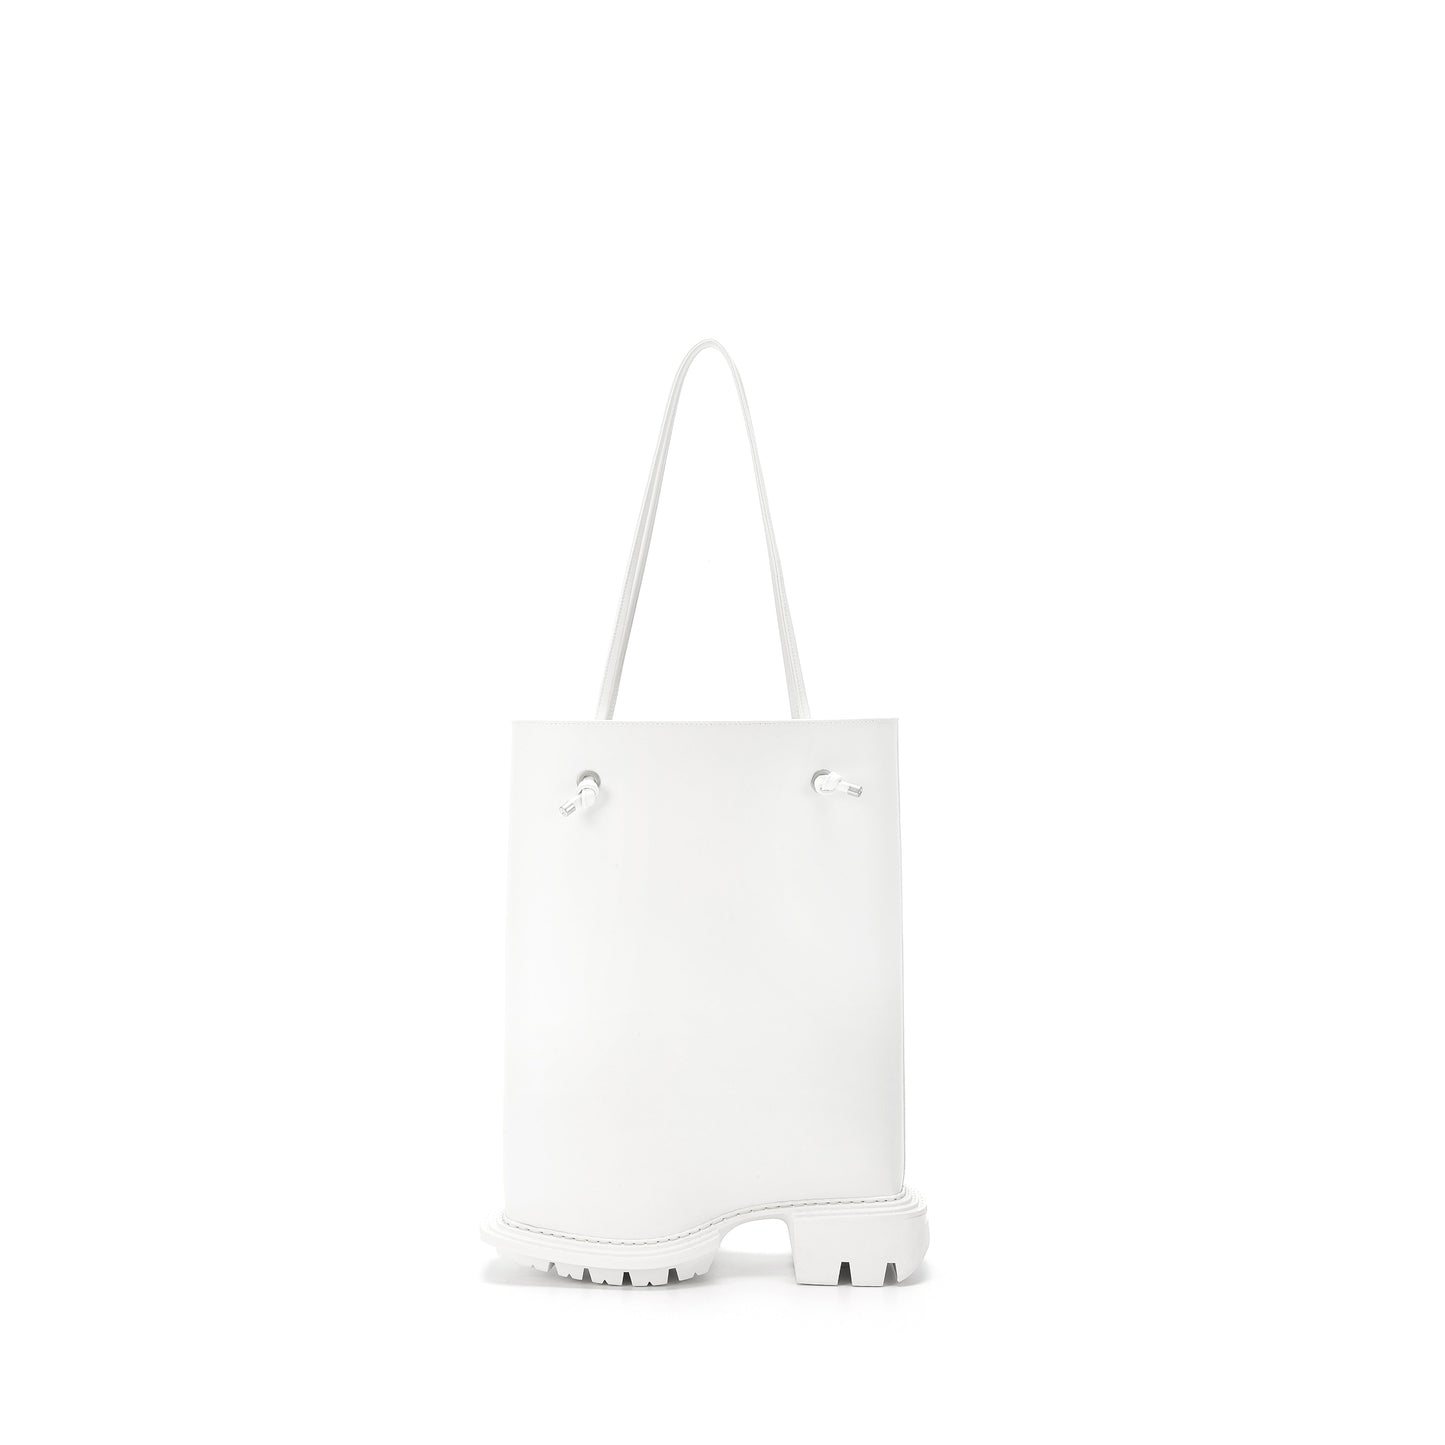 Reel Sole Tote Bag (White and Print)